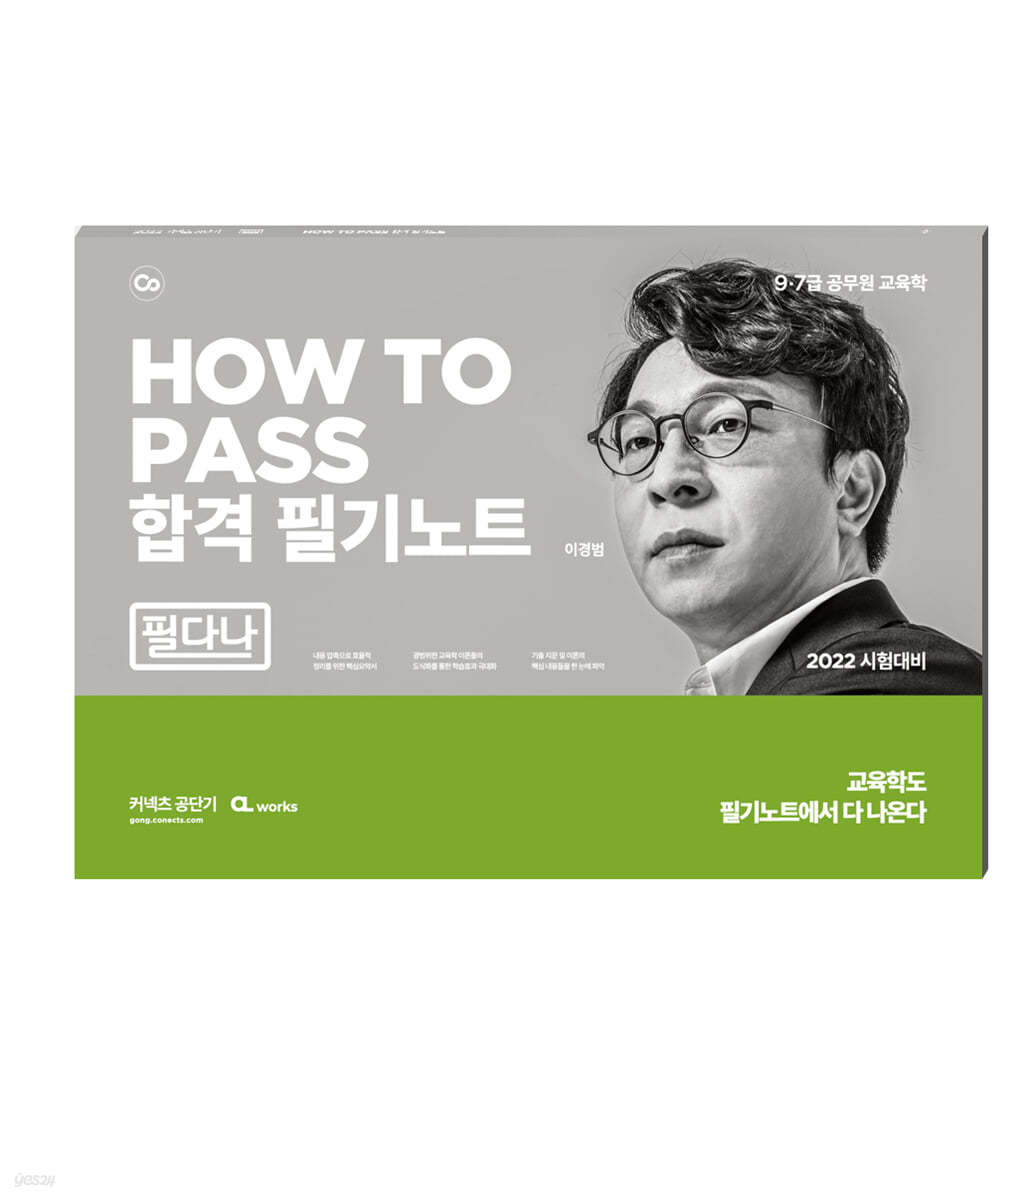 2022 HOW TO PASS 합격 필기노트